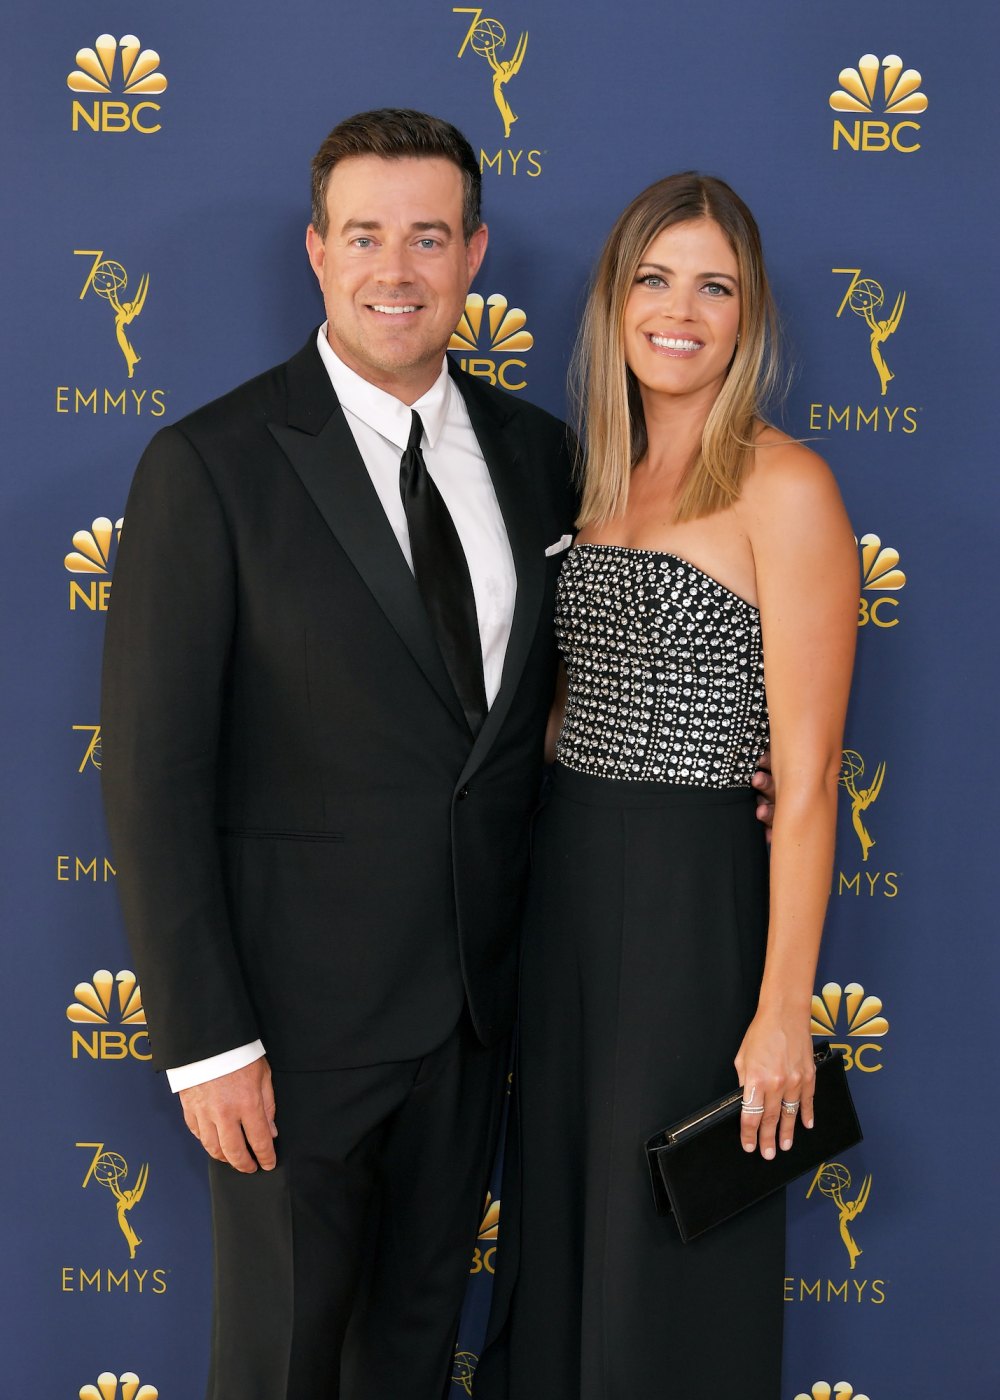 Carson Daly Says He and Wife Siri Pinter Sleep in Separate Beds